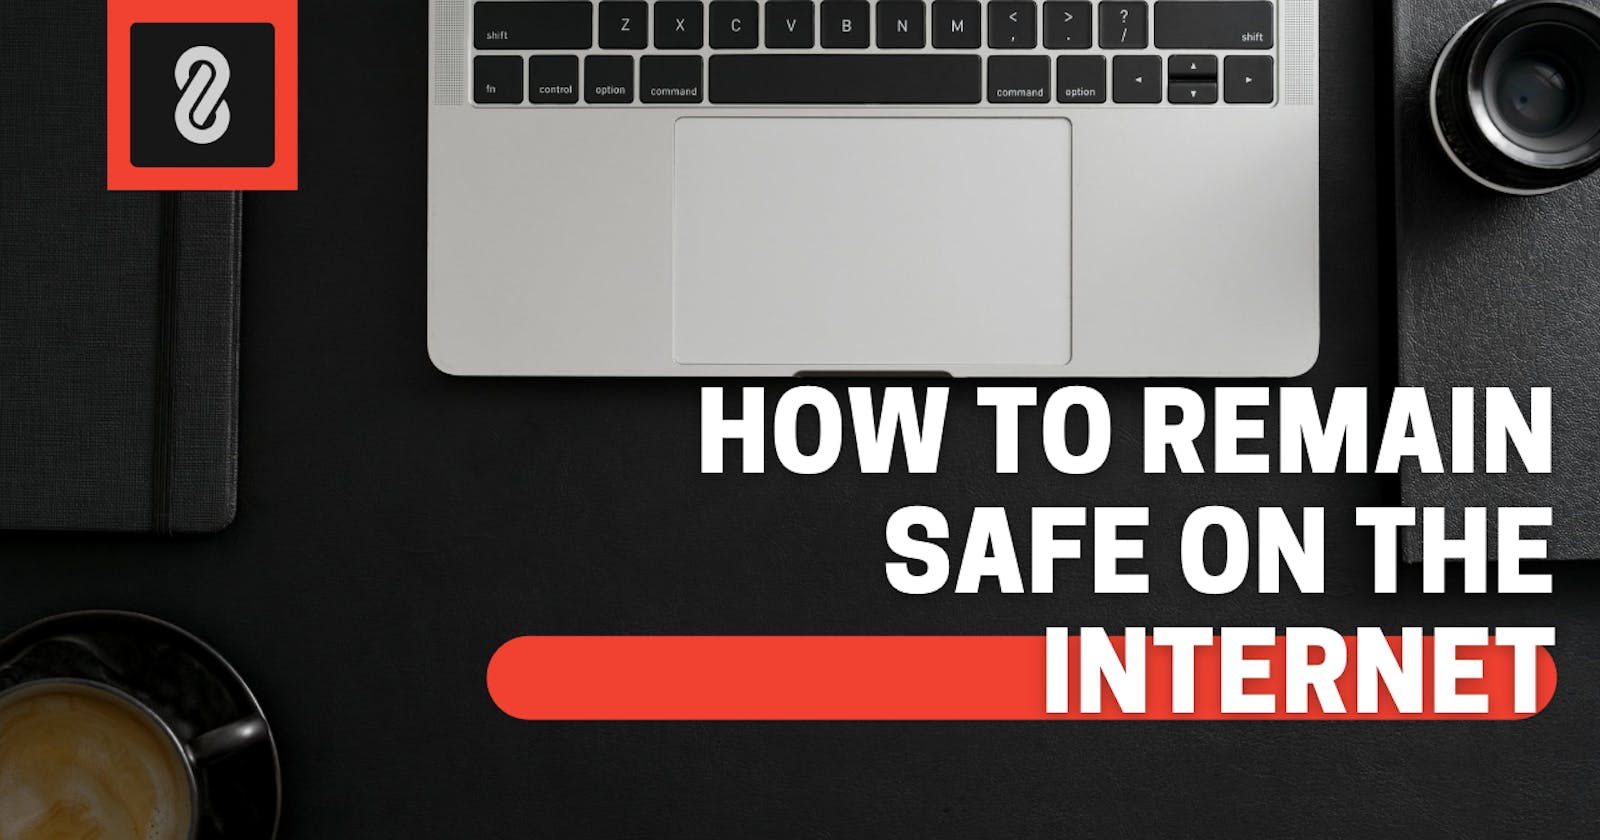 How To Remain Safe On The Internet